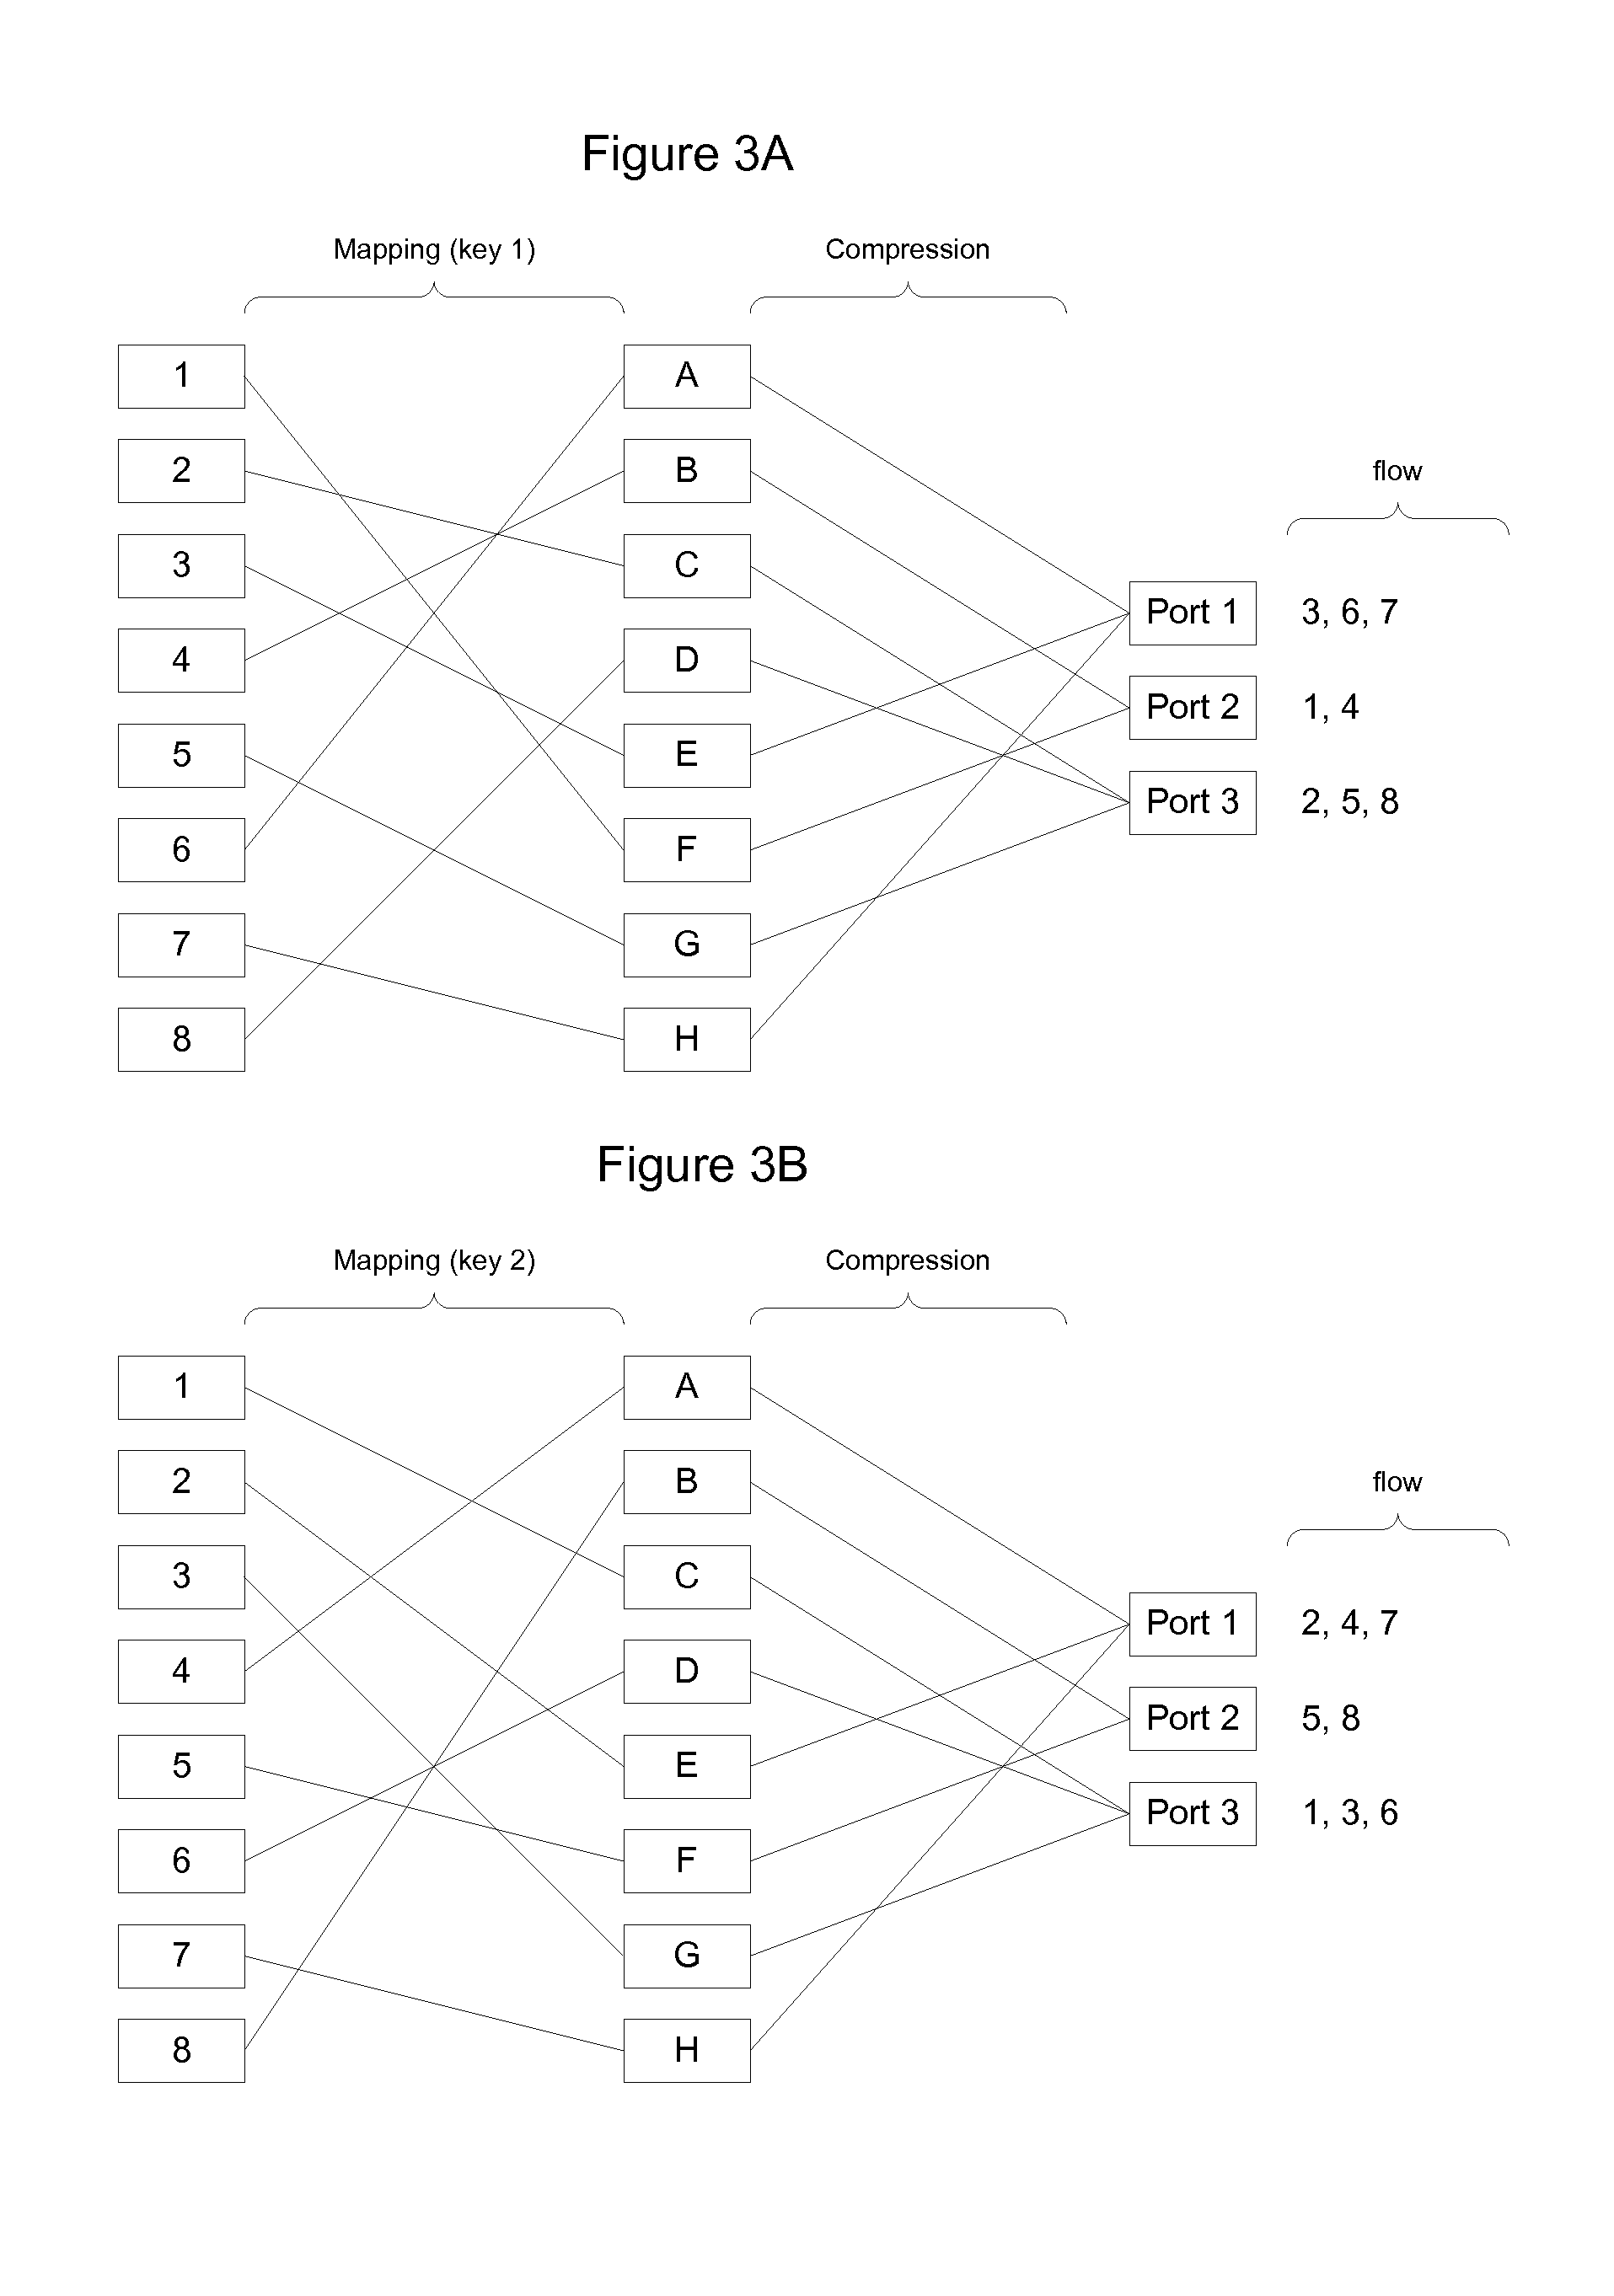 Next Hop Computation Functions for Equal Cost Multi-Path Packet Switching Networks